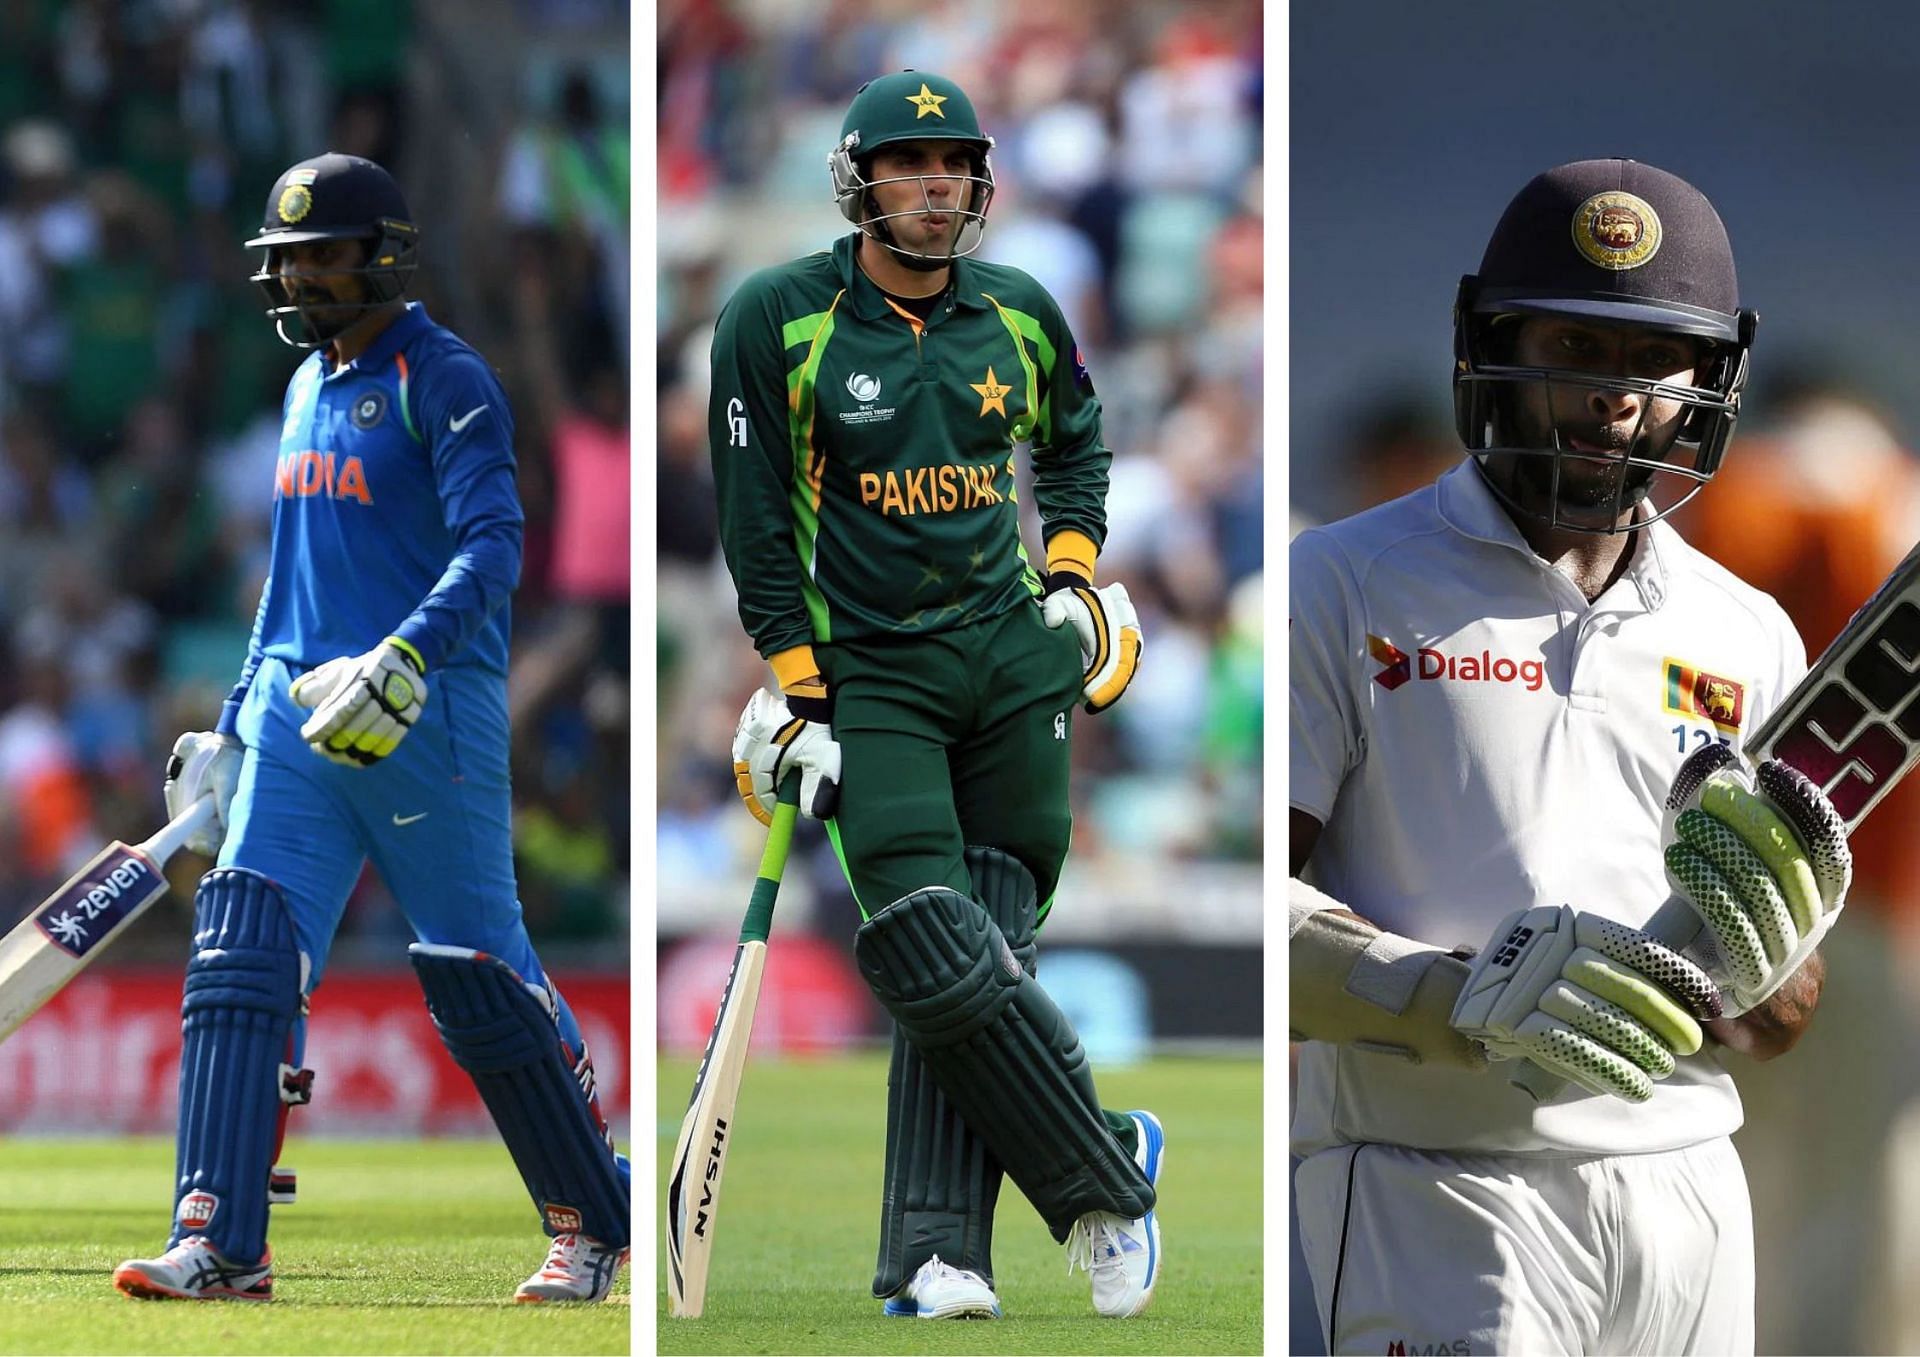 Good averages, but where&#039;s that century? Ravindra Jadeja, Misbah-ul-Haq and Niroshan Dickwella. (From left to right).